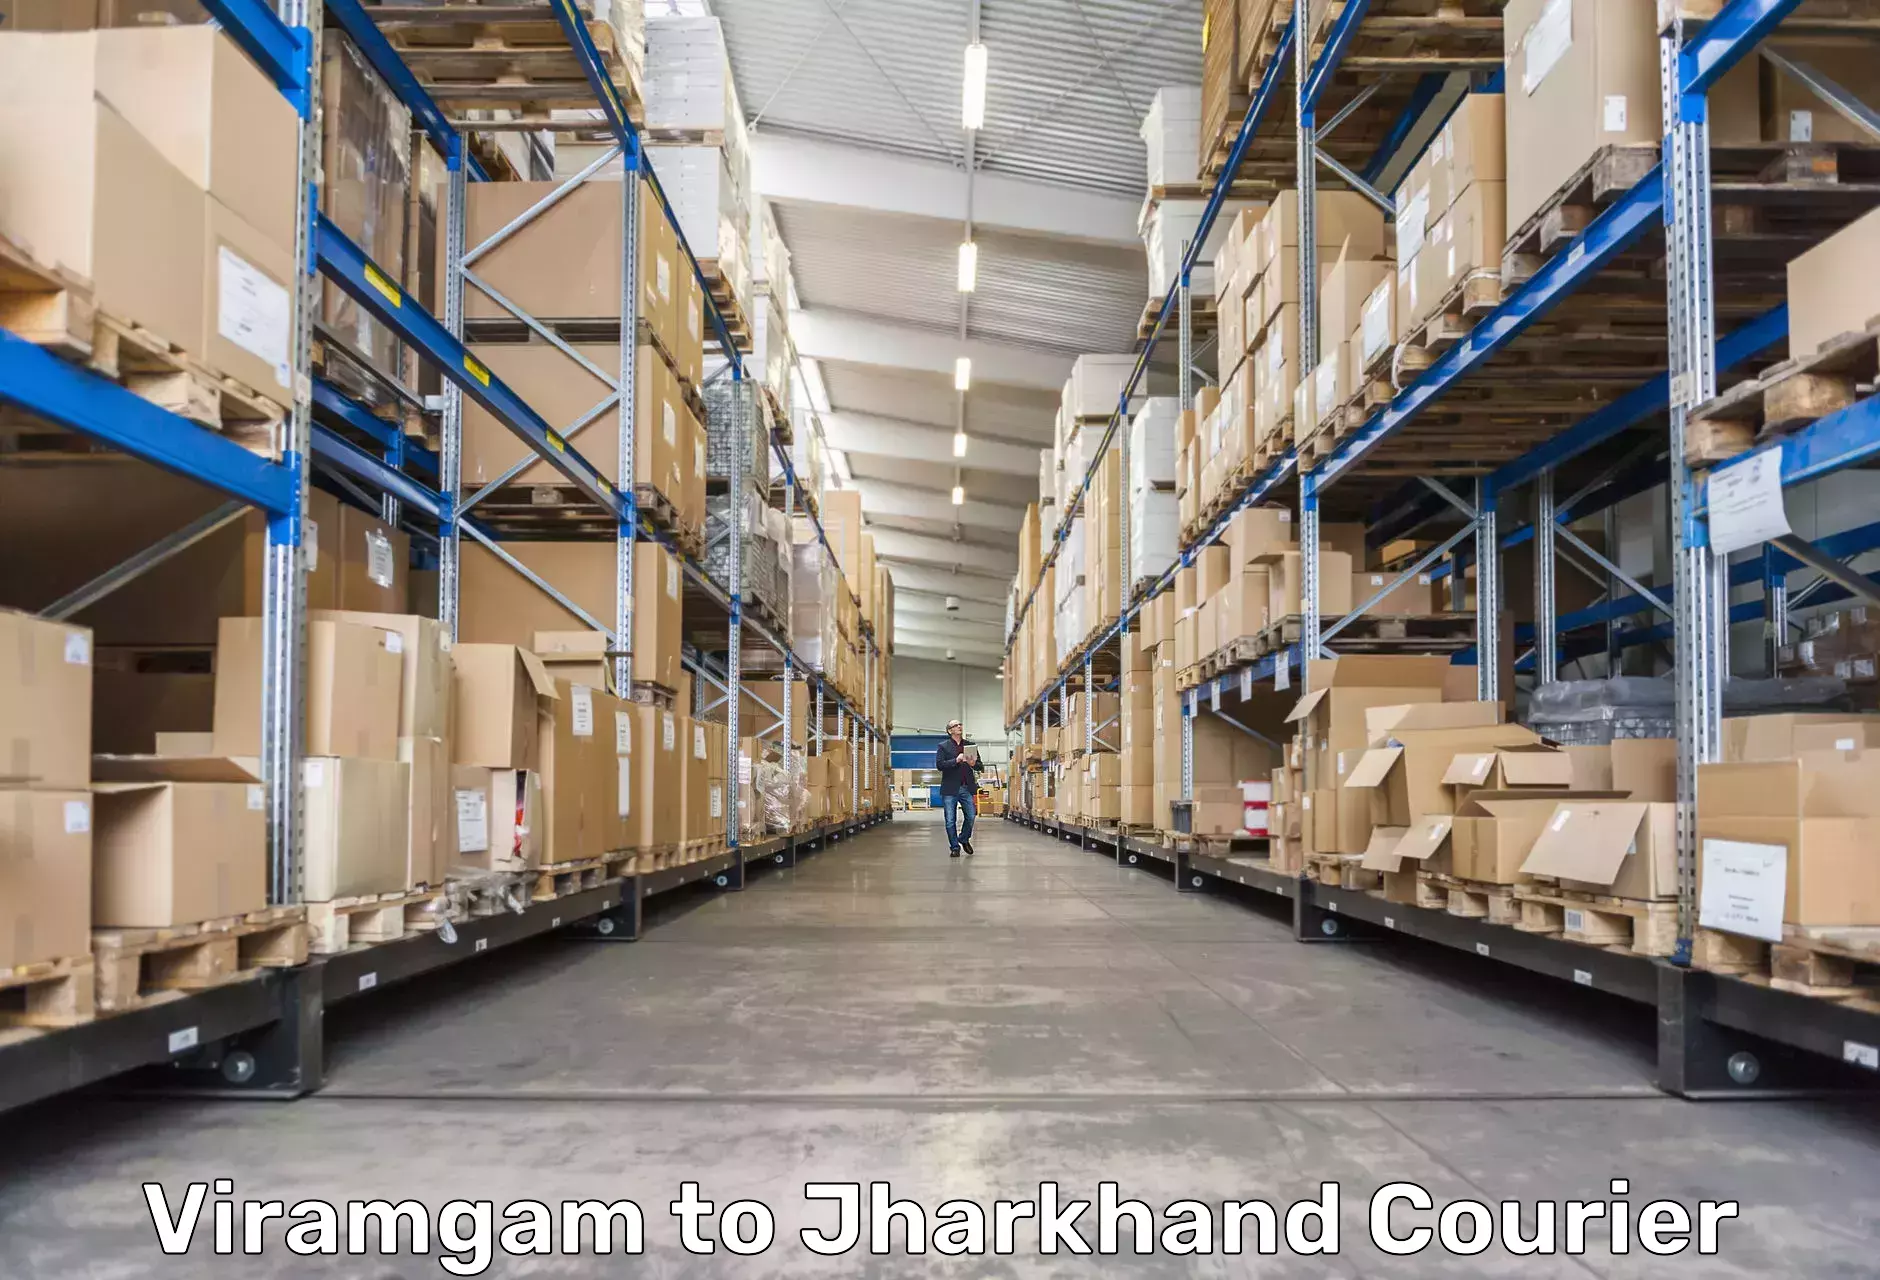 Express courier capabilities Viramgam to Jamshedpur